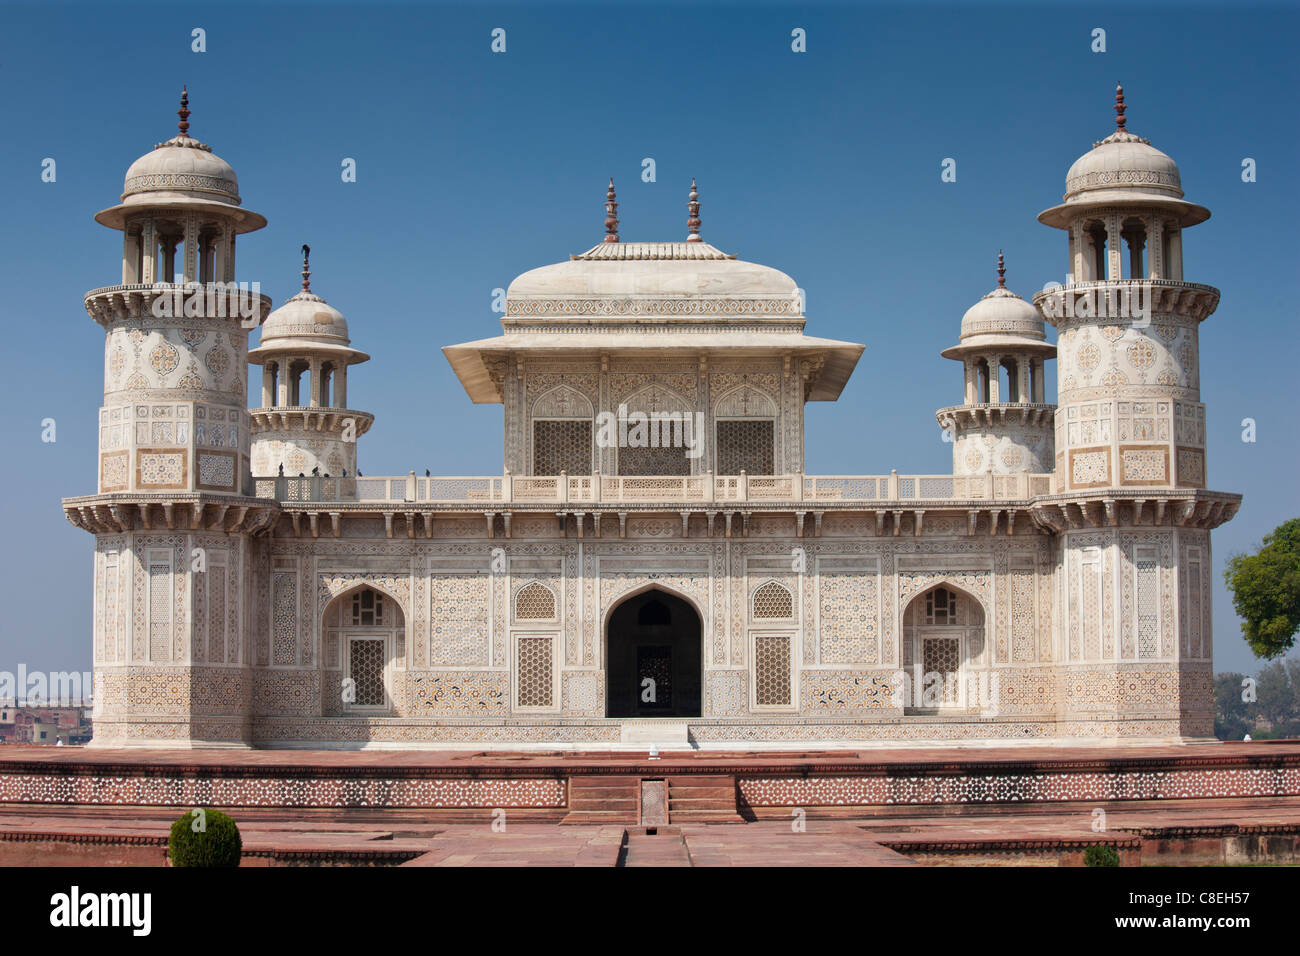 Tomb of Etimad Ud Doulah, 17th Century Mughal tomb built 1628, Agra, India Stock Photo